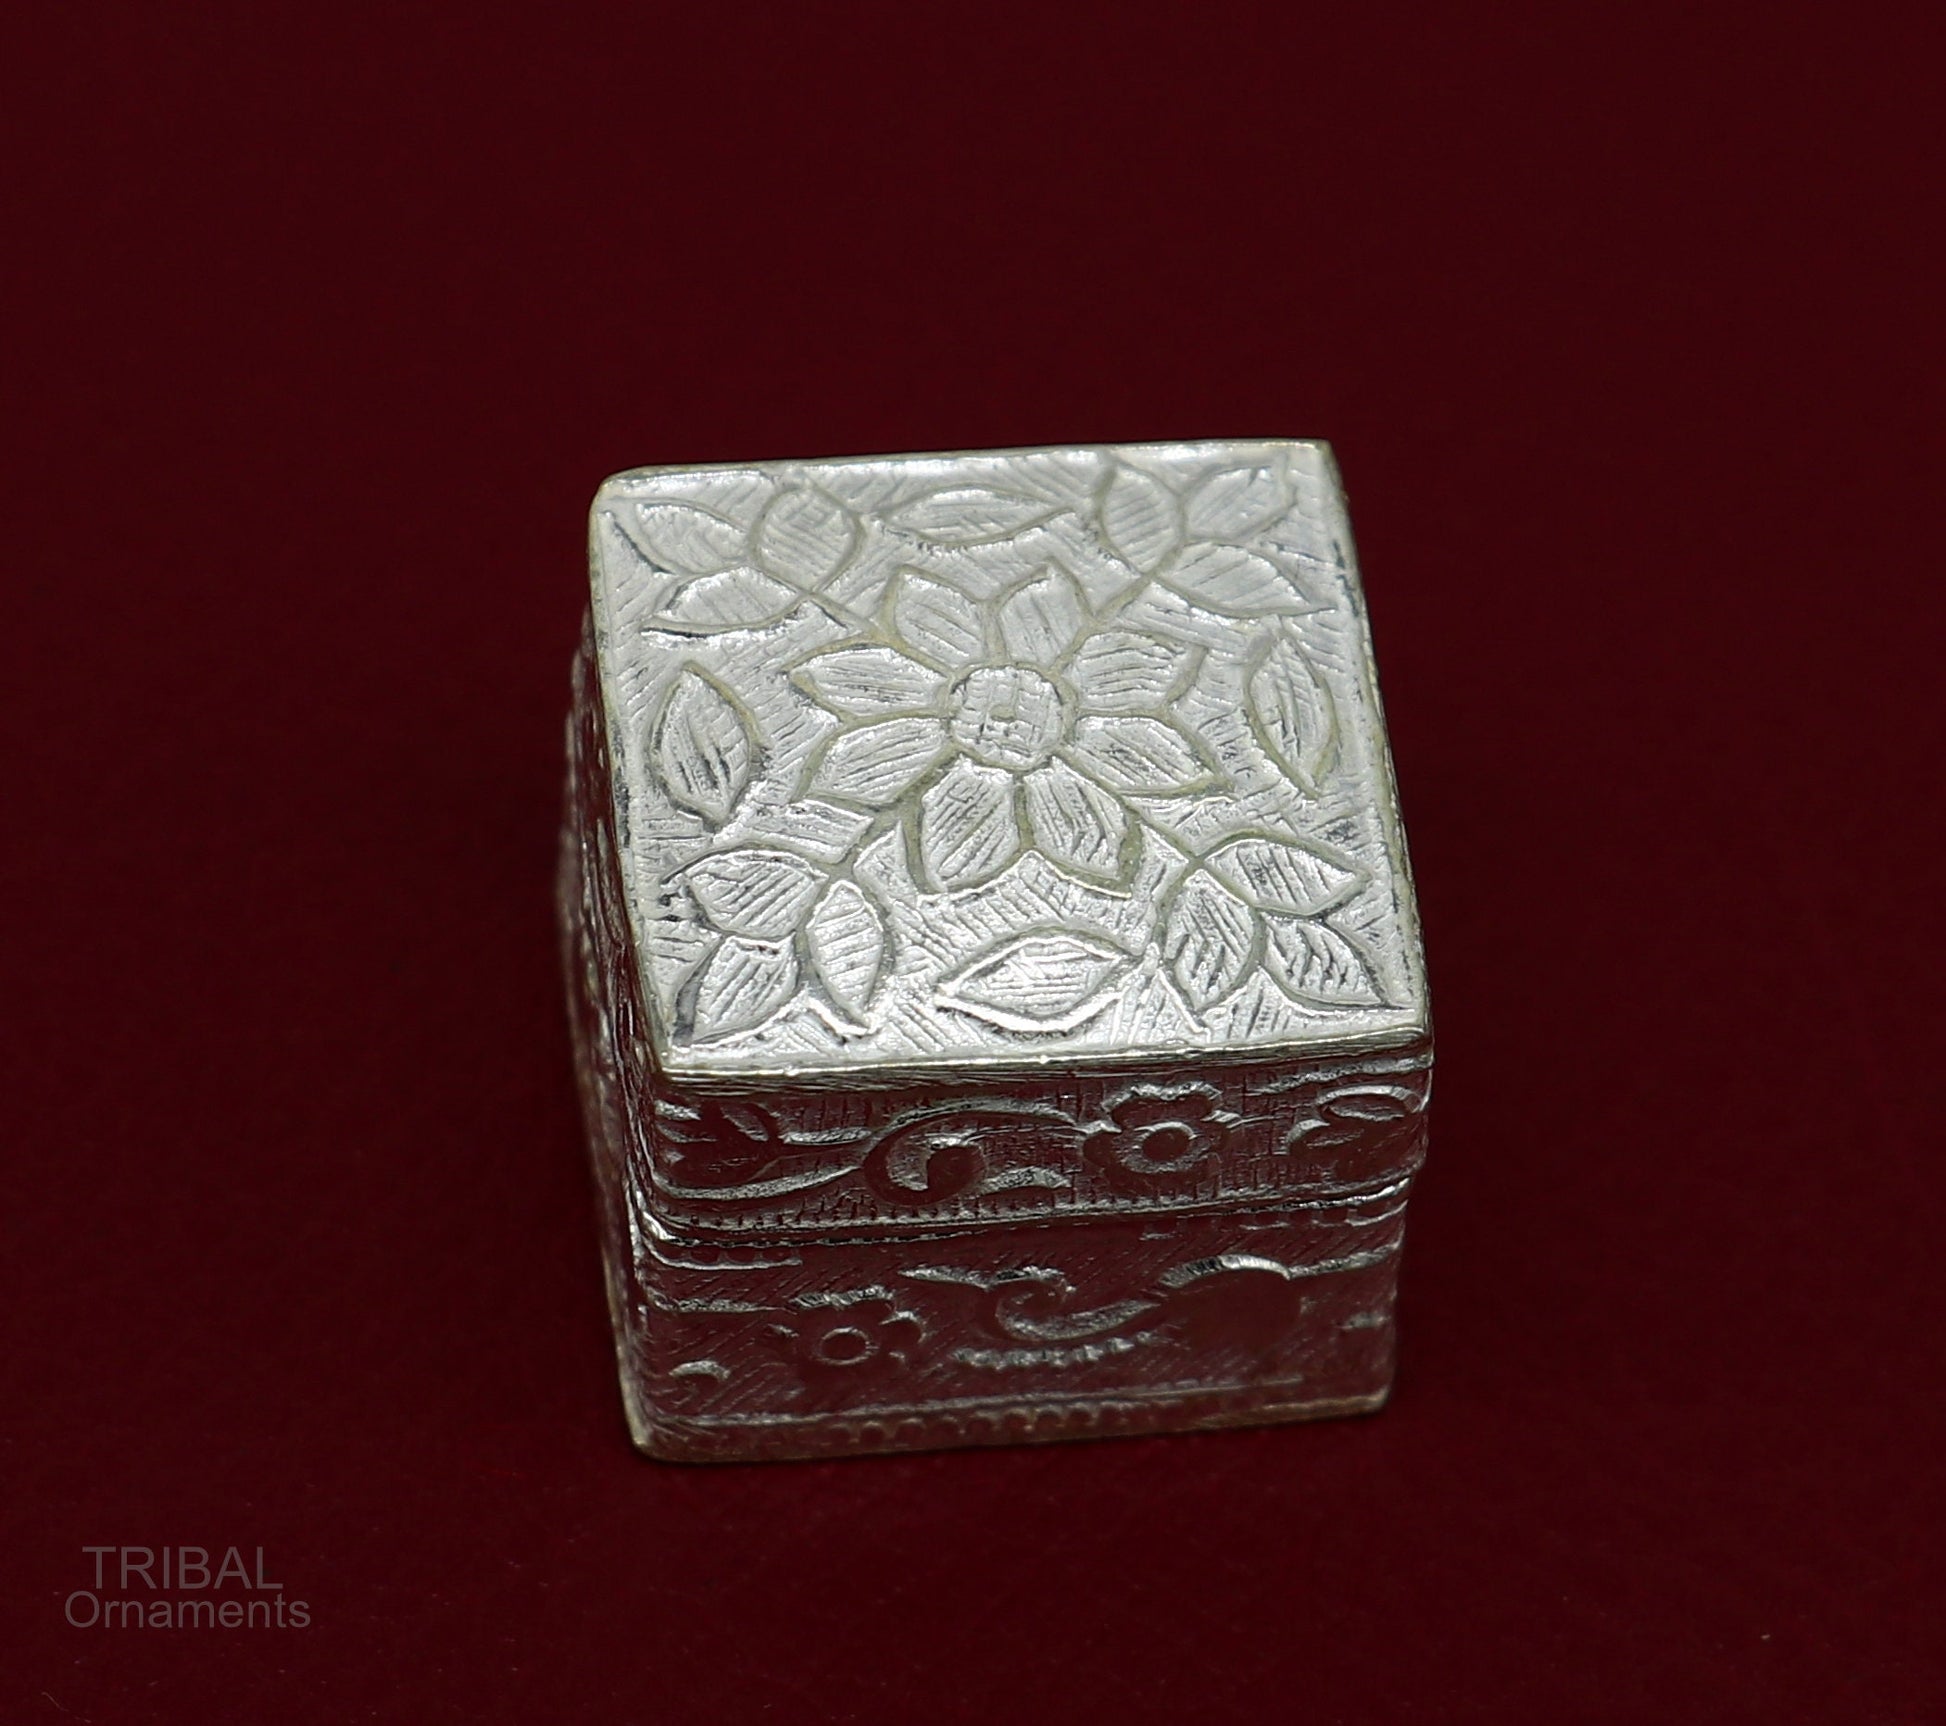 vintage style small bridal queen sterling silver trinket box or eyes kajal box, container box, small jewelry box, bridal art gifting  stb129 - TRIBAL ORNAMENTS